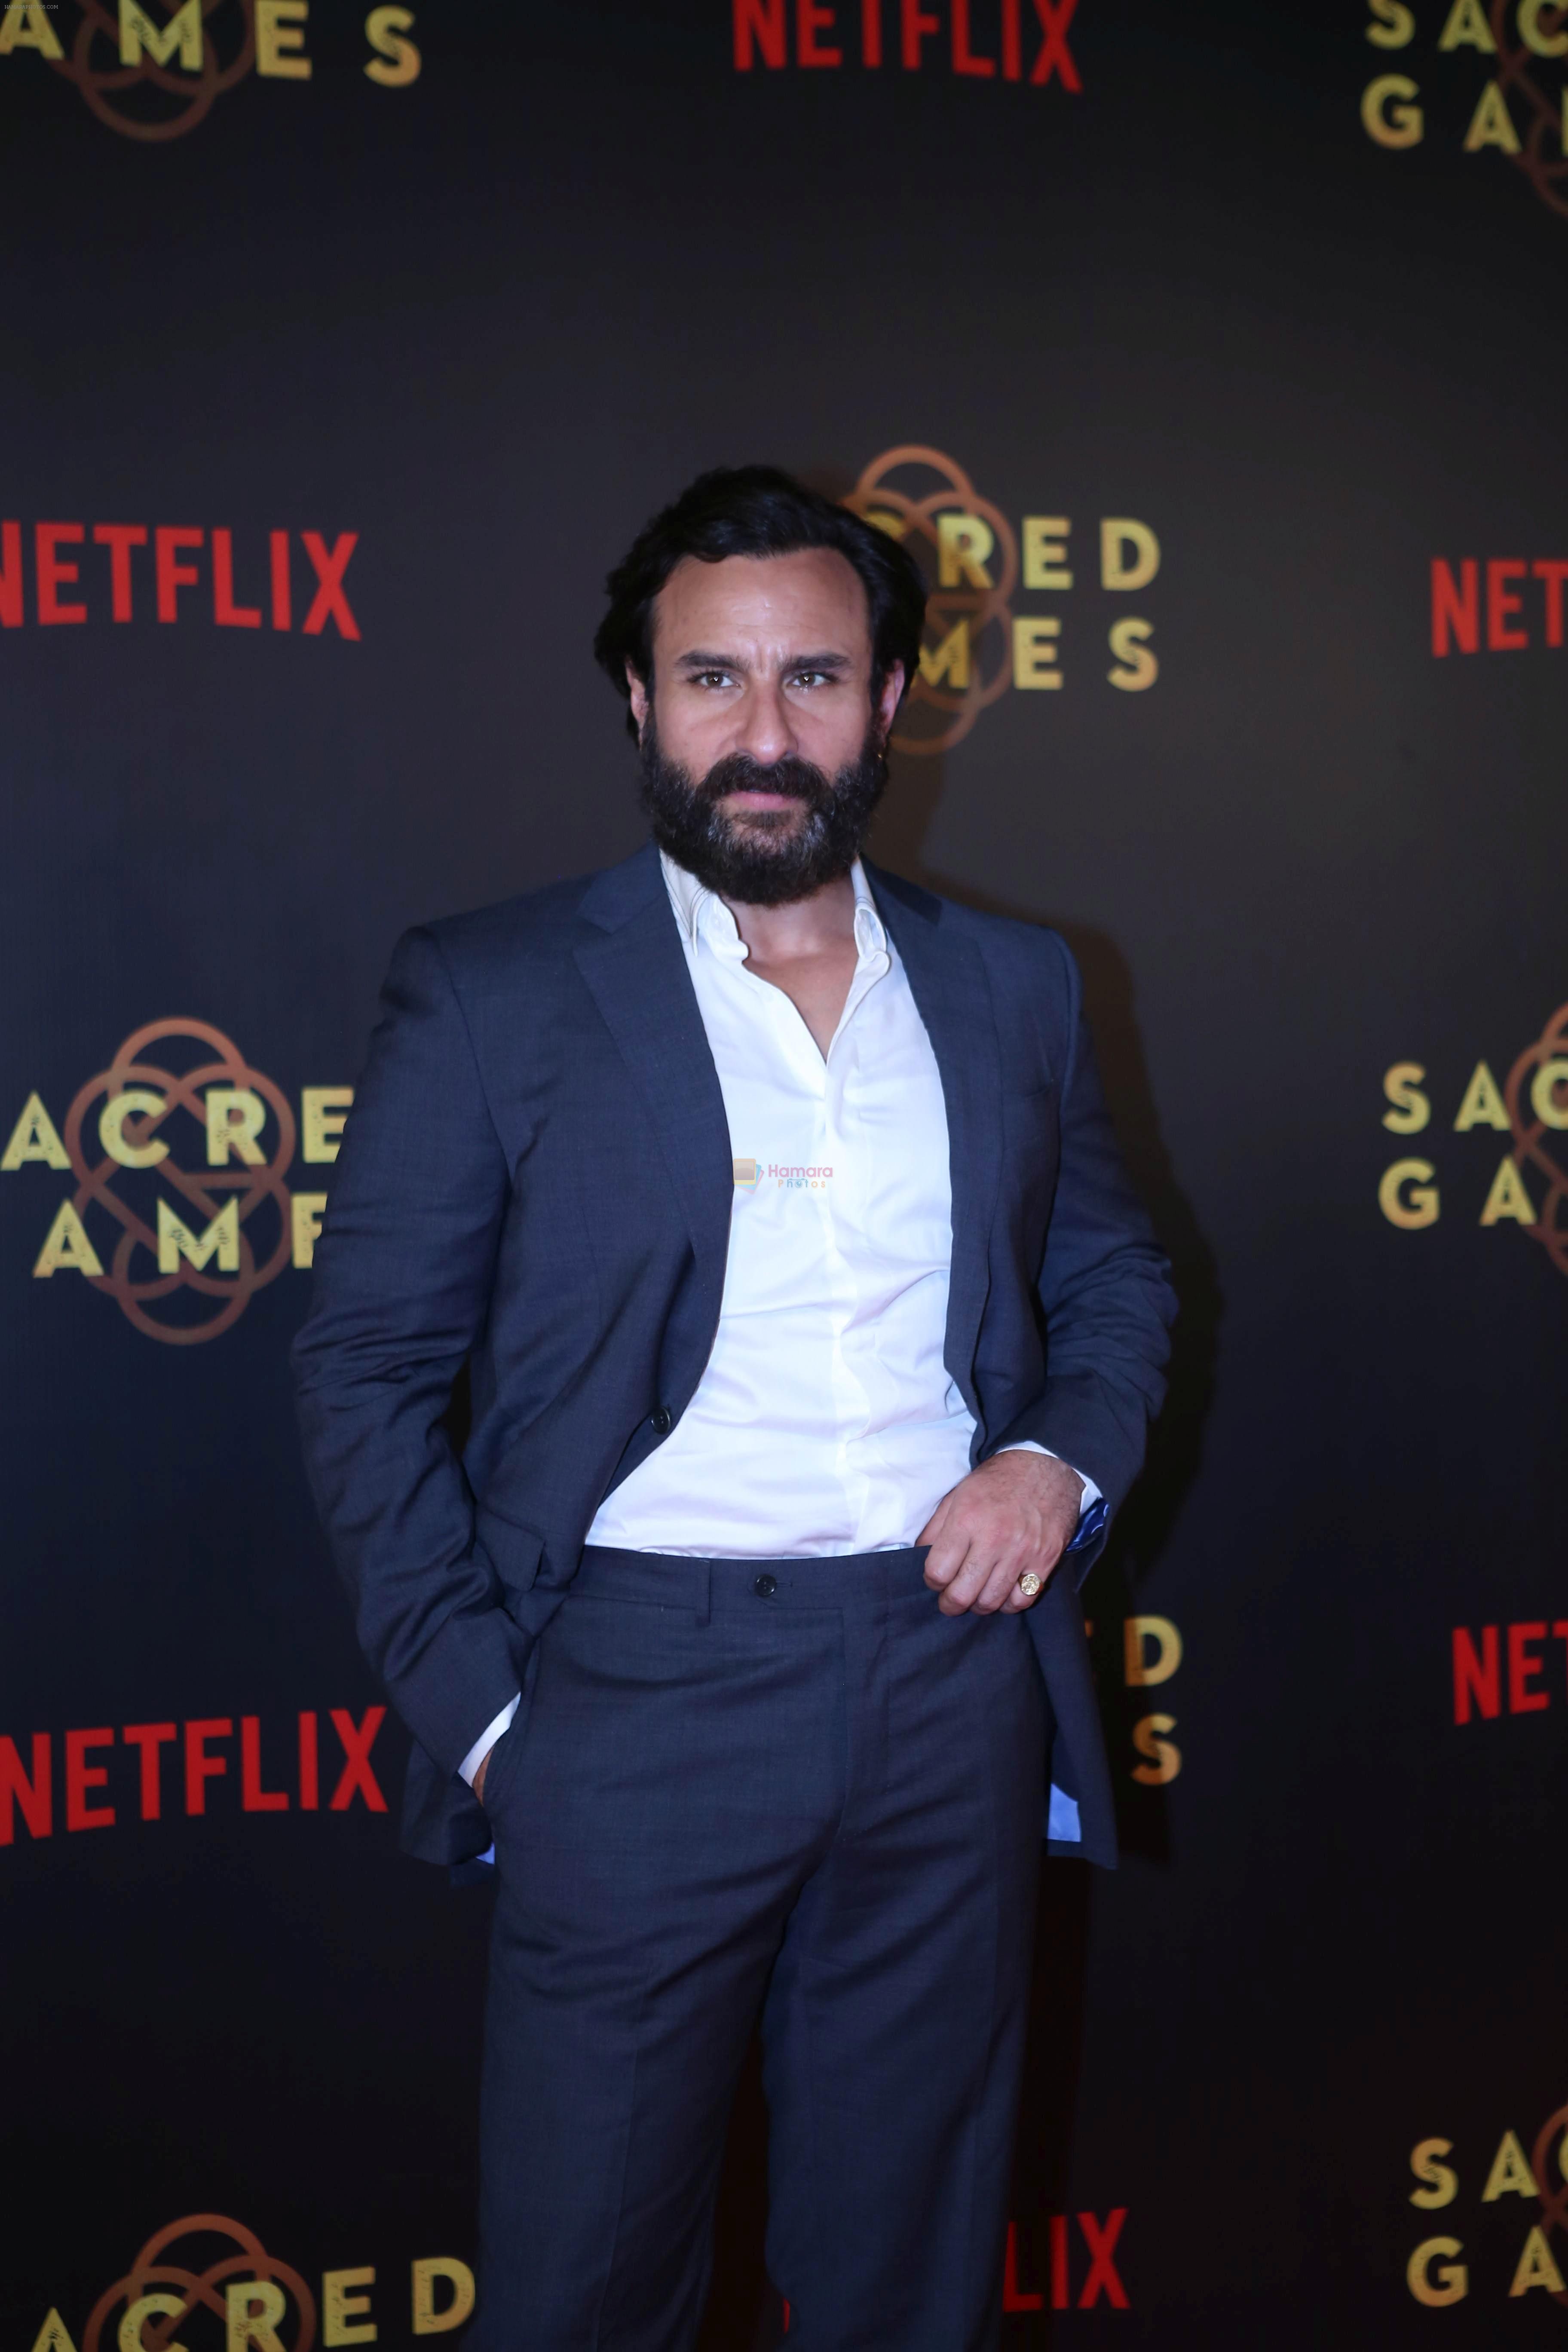 Saif Ali Khan at the Screening of Netflix Sacred Games in pvr icon Andheri on 28th June 2018